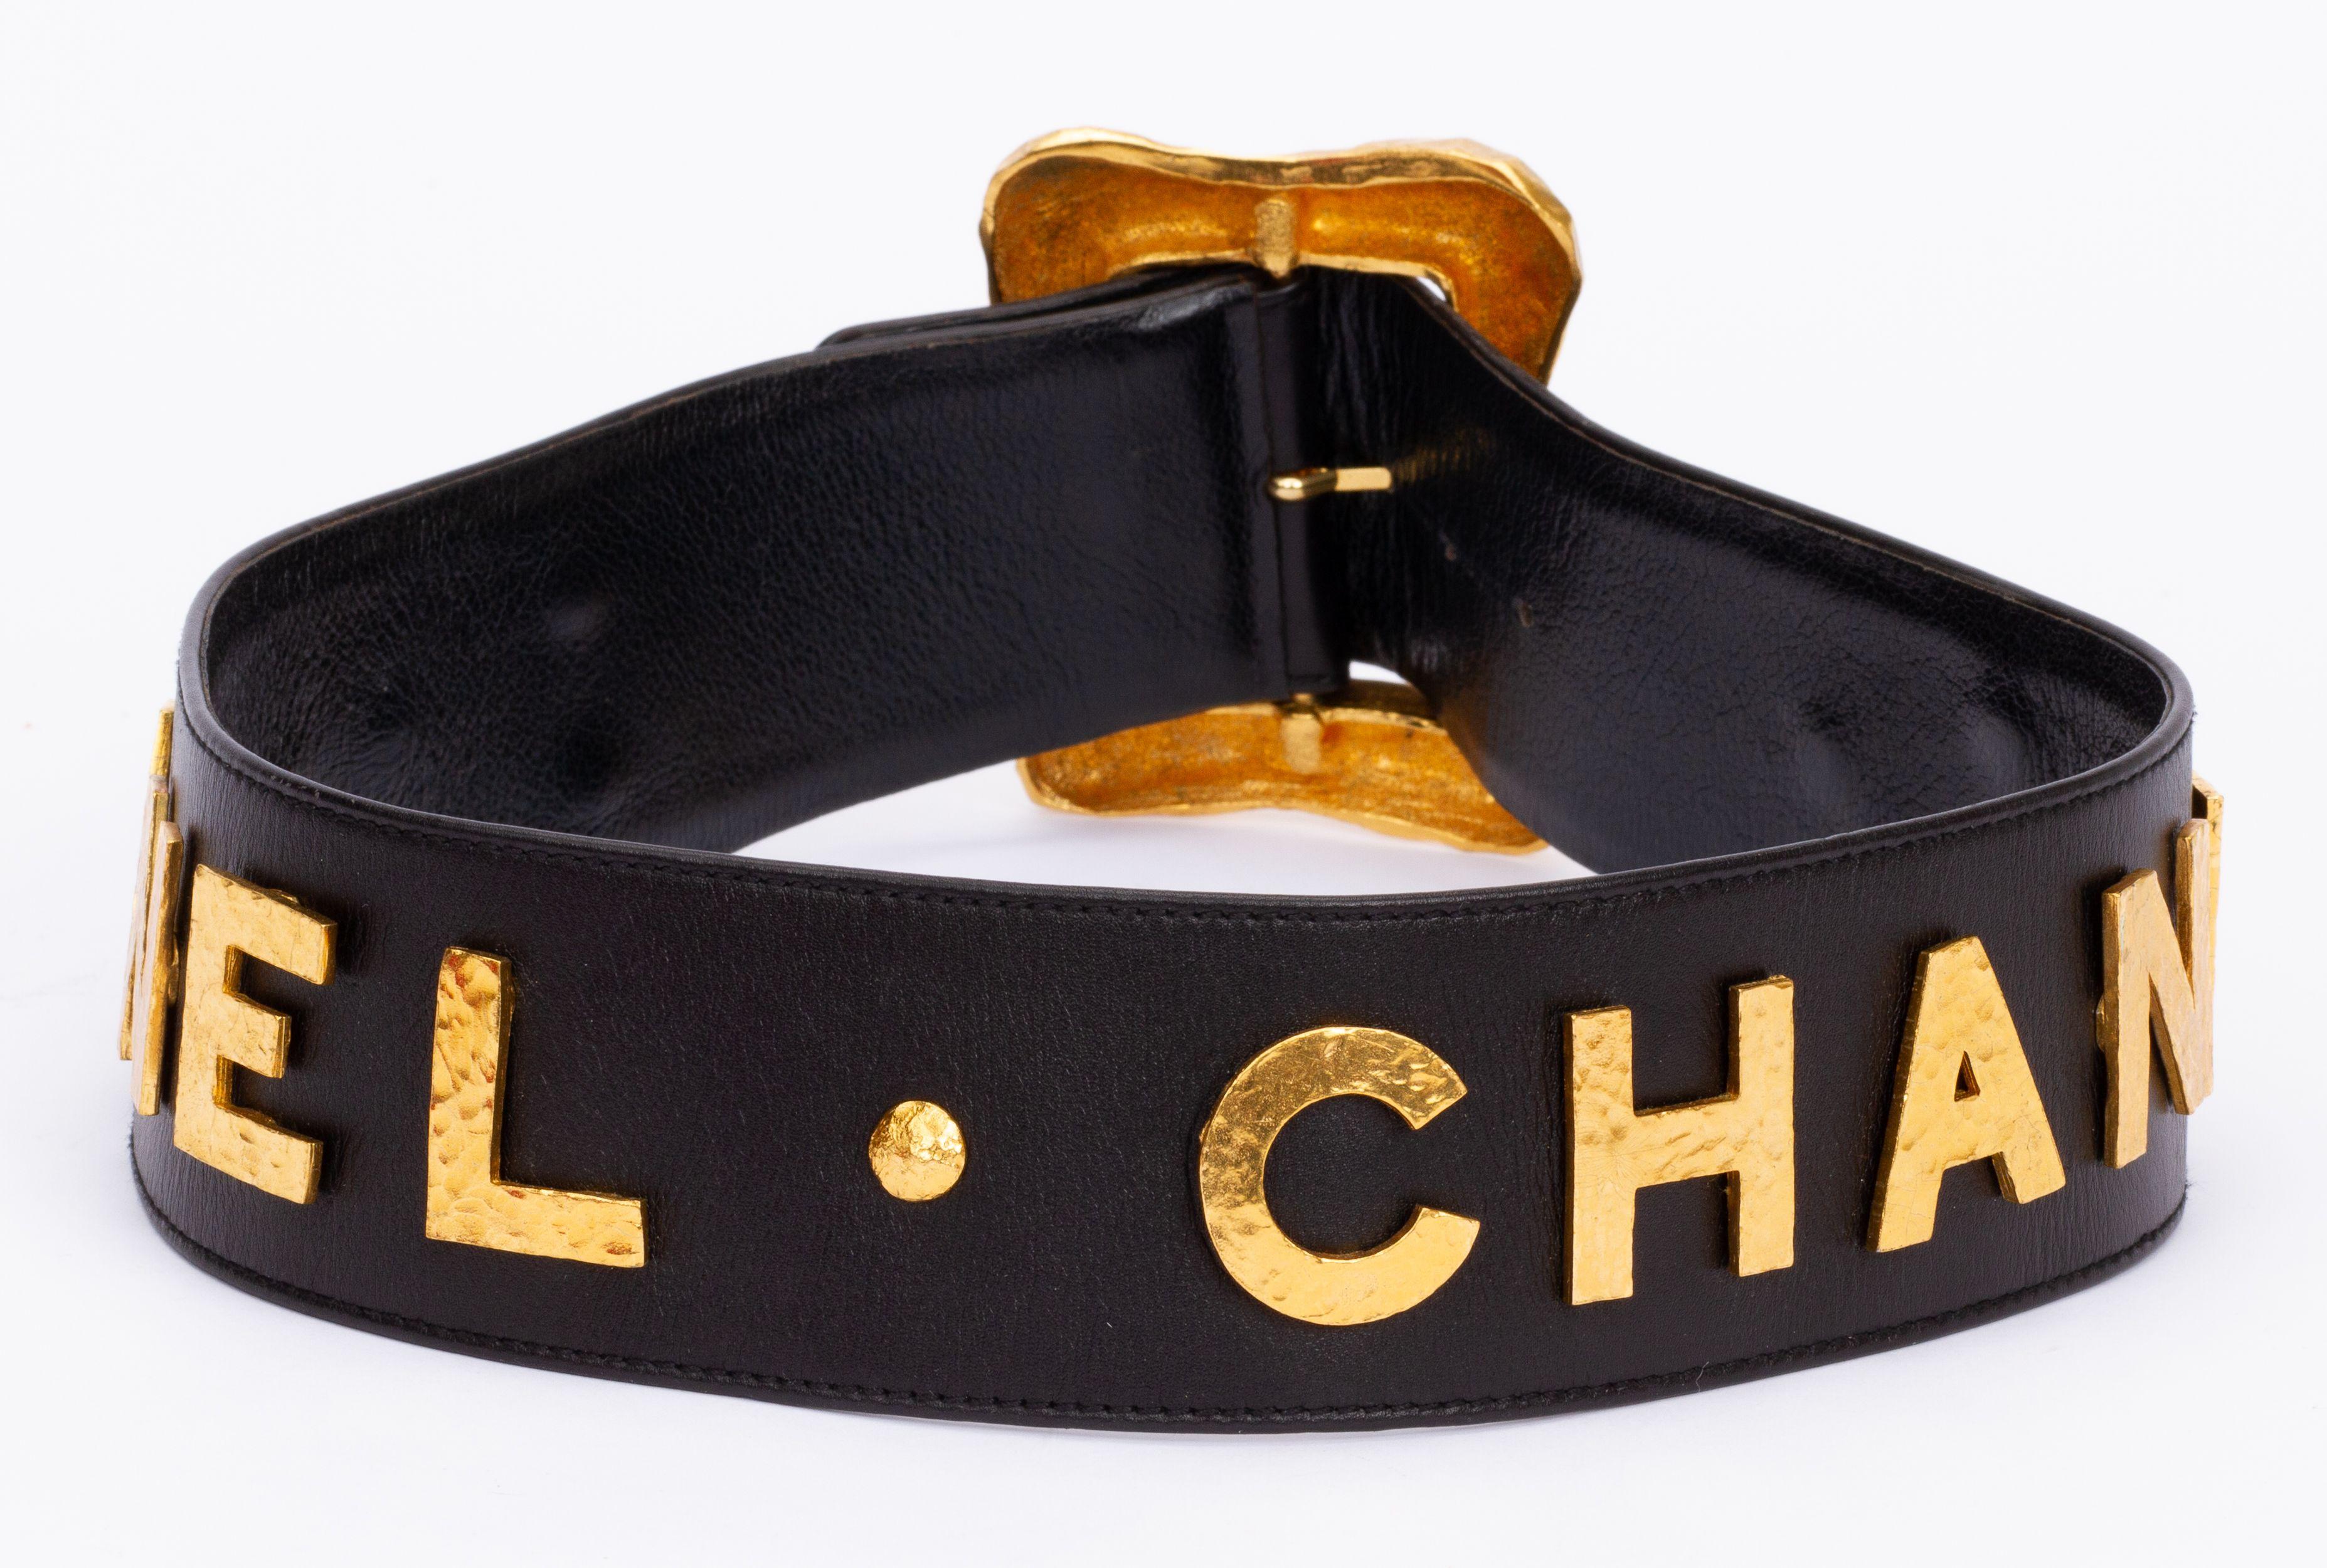 Chanel rare and collectible autumn 93 oversize belt. Black leather with hammered gold lettering. Small size 70cm/28” Buckle dimensions: 4